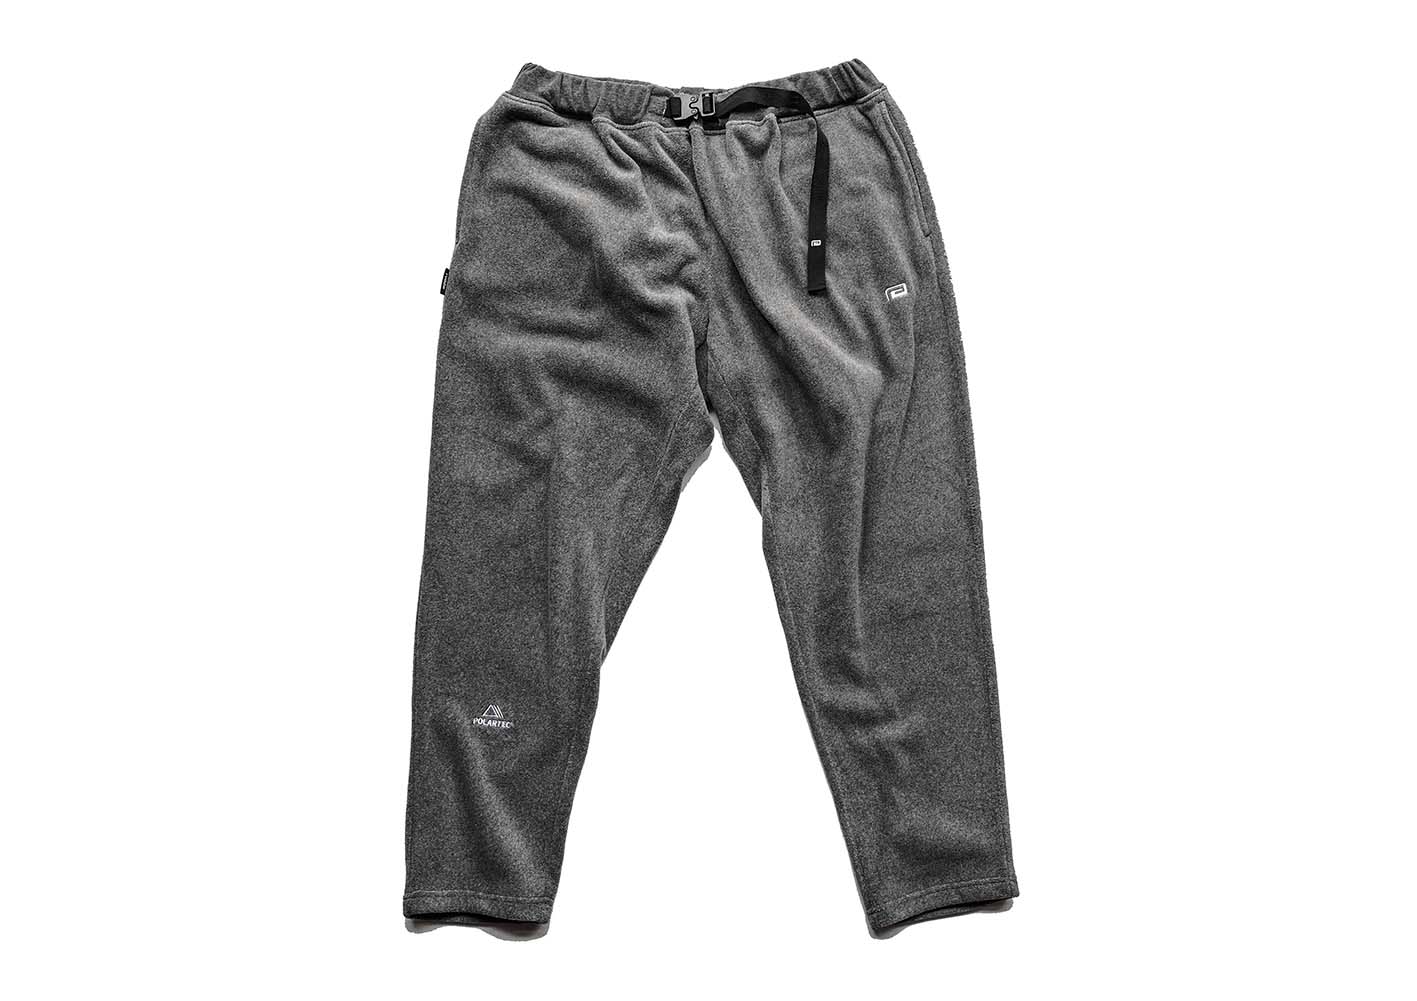 Shop Limited Edition Pants from Reversal RVDDW Japan